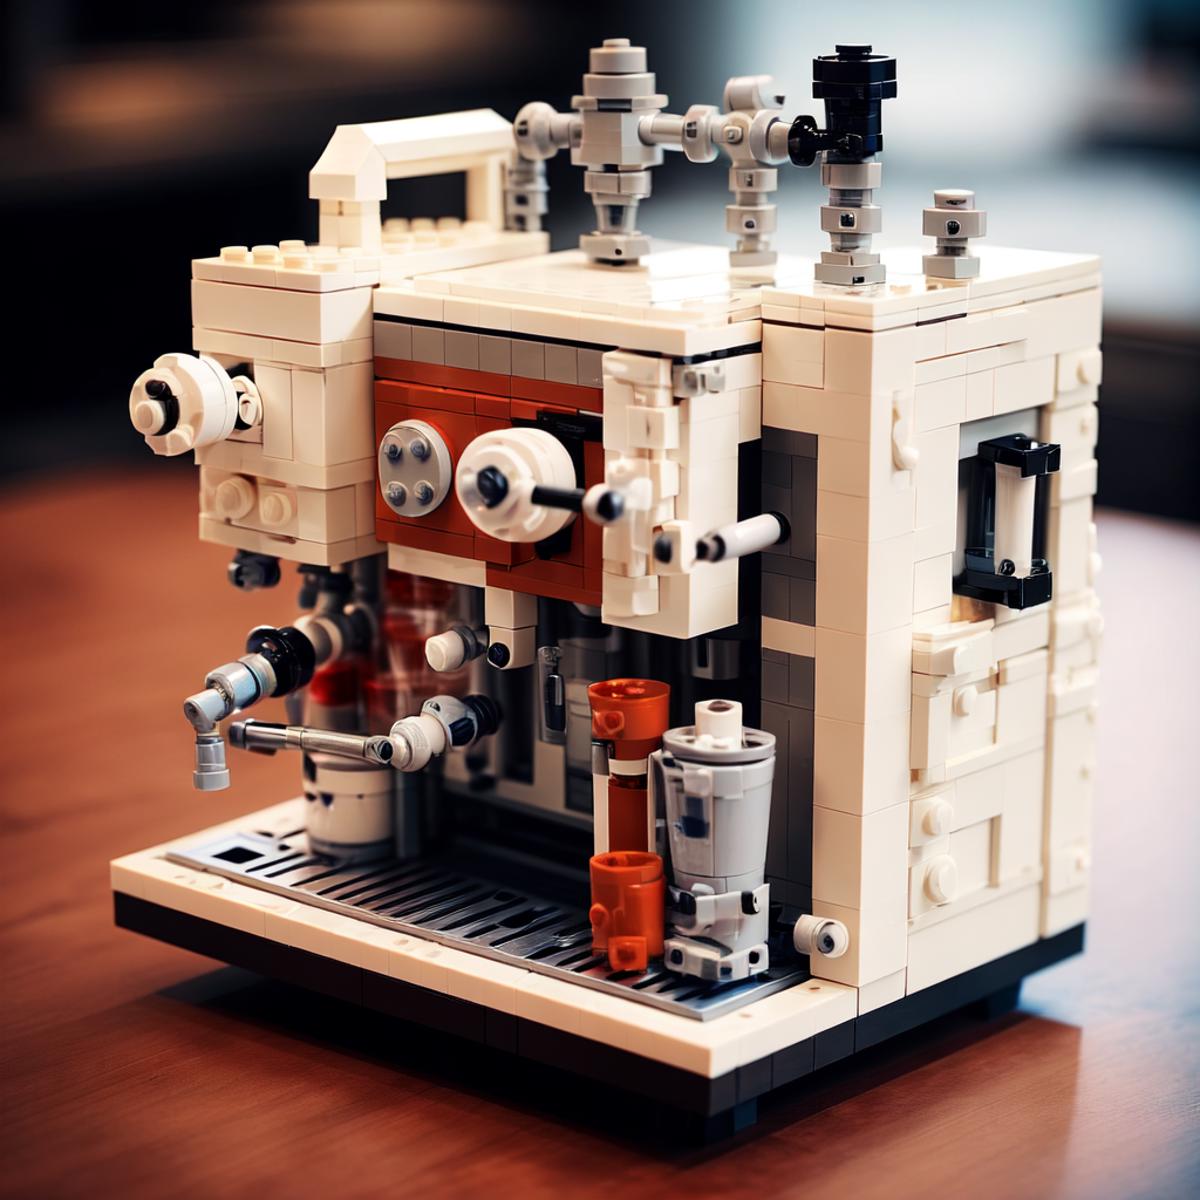 A Lego Machine with a Coffee Maker Design on a Brown Table